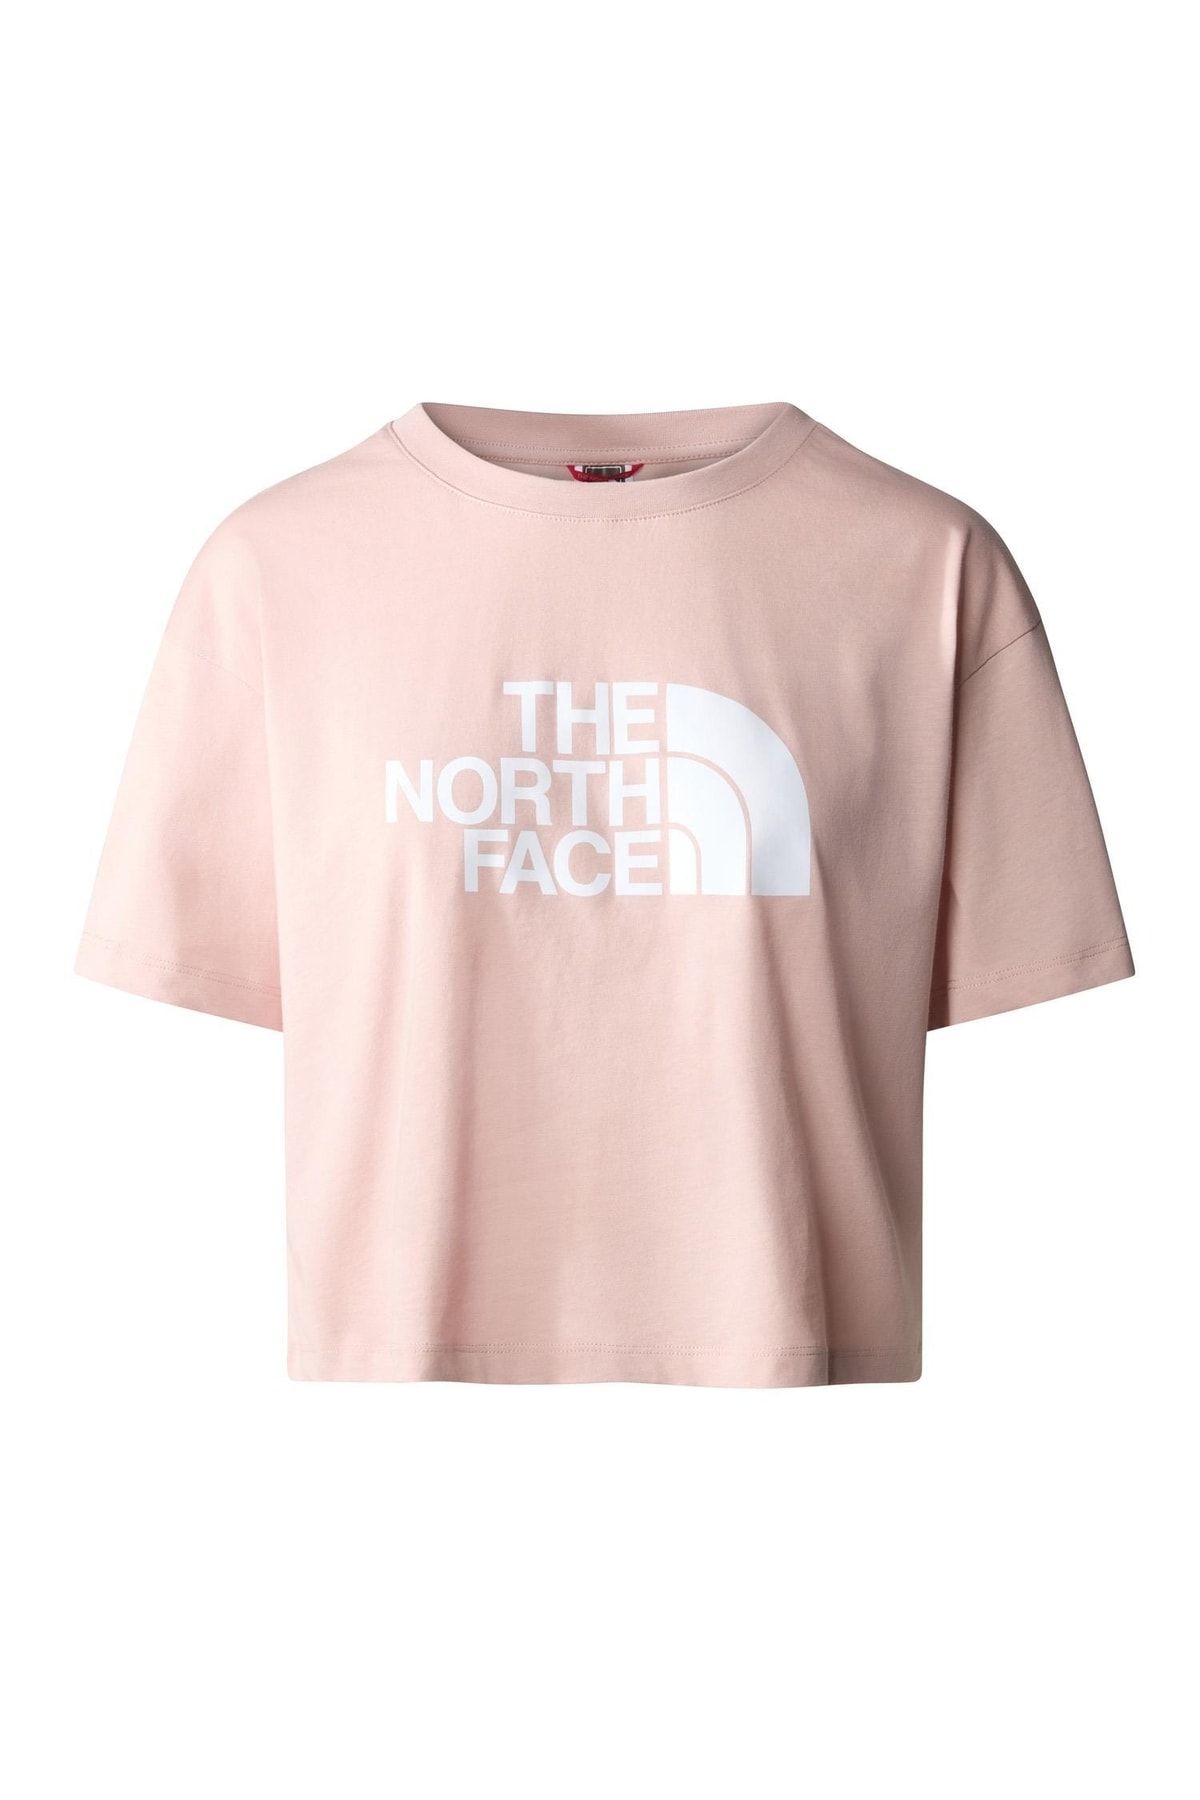 The North Face W S/s Cropped Easy Tee Kadın T-shirt Nf0a4t1rlk61